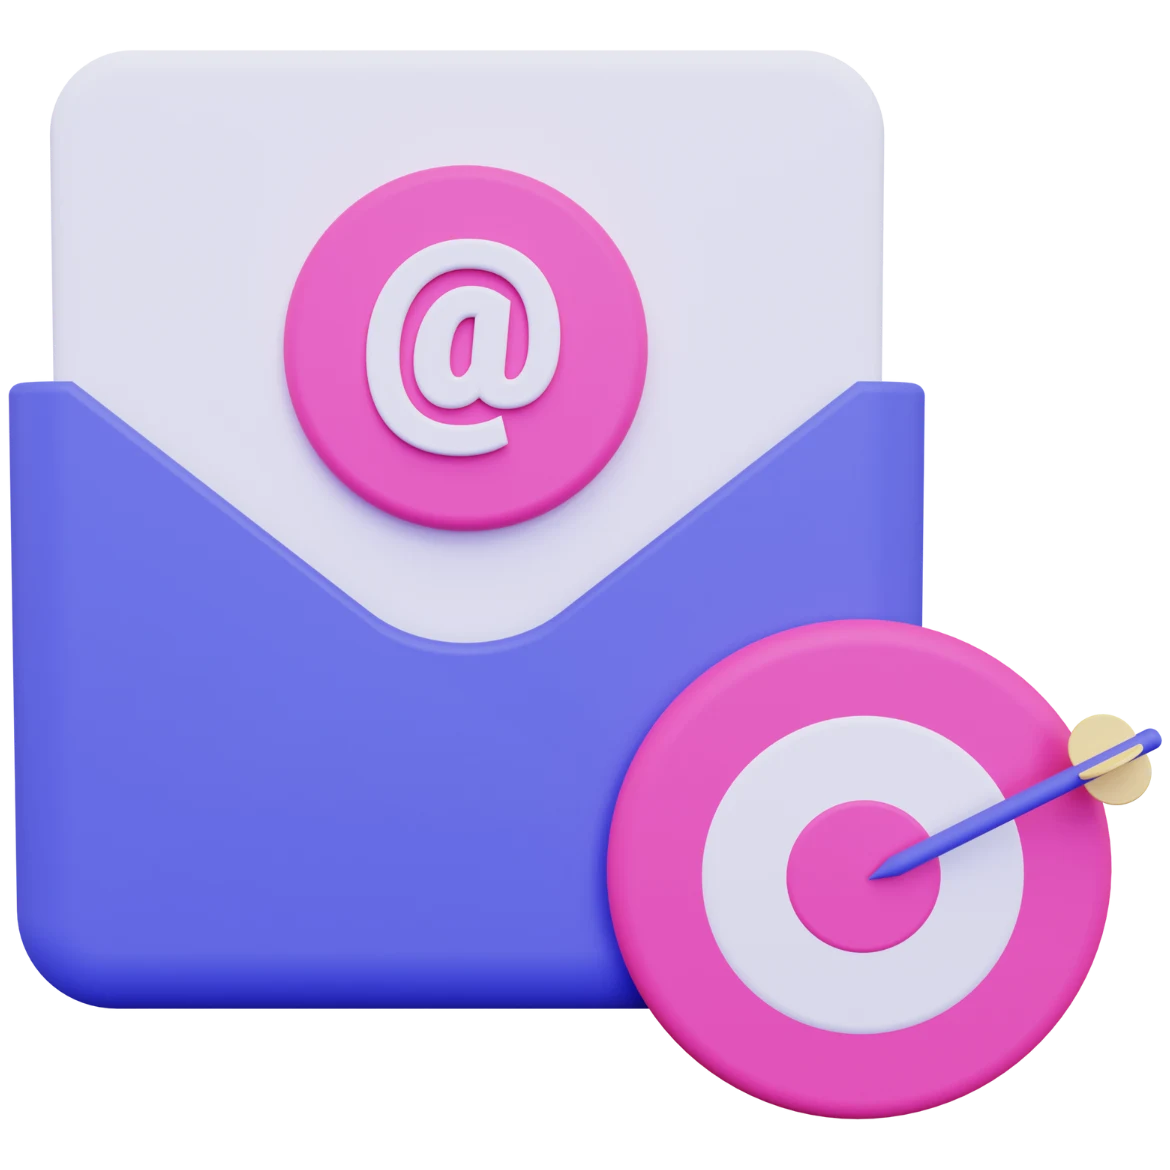 CRM Email Marketing